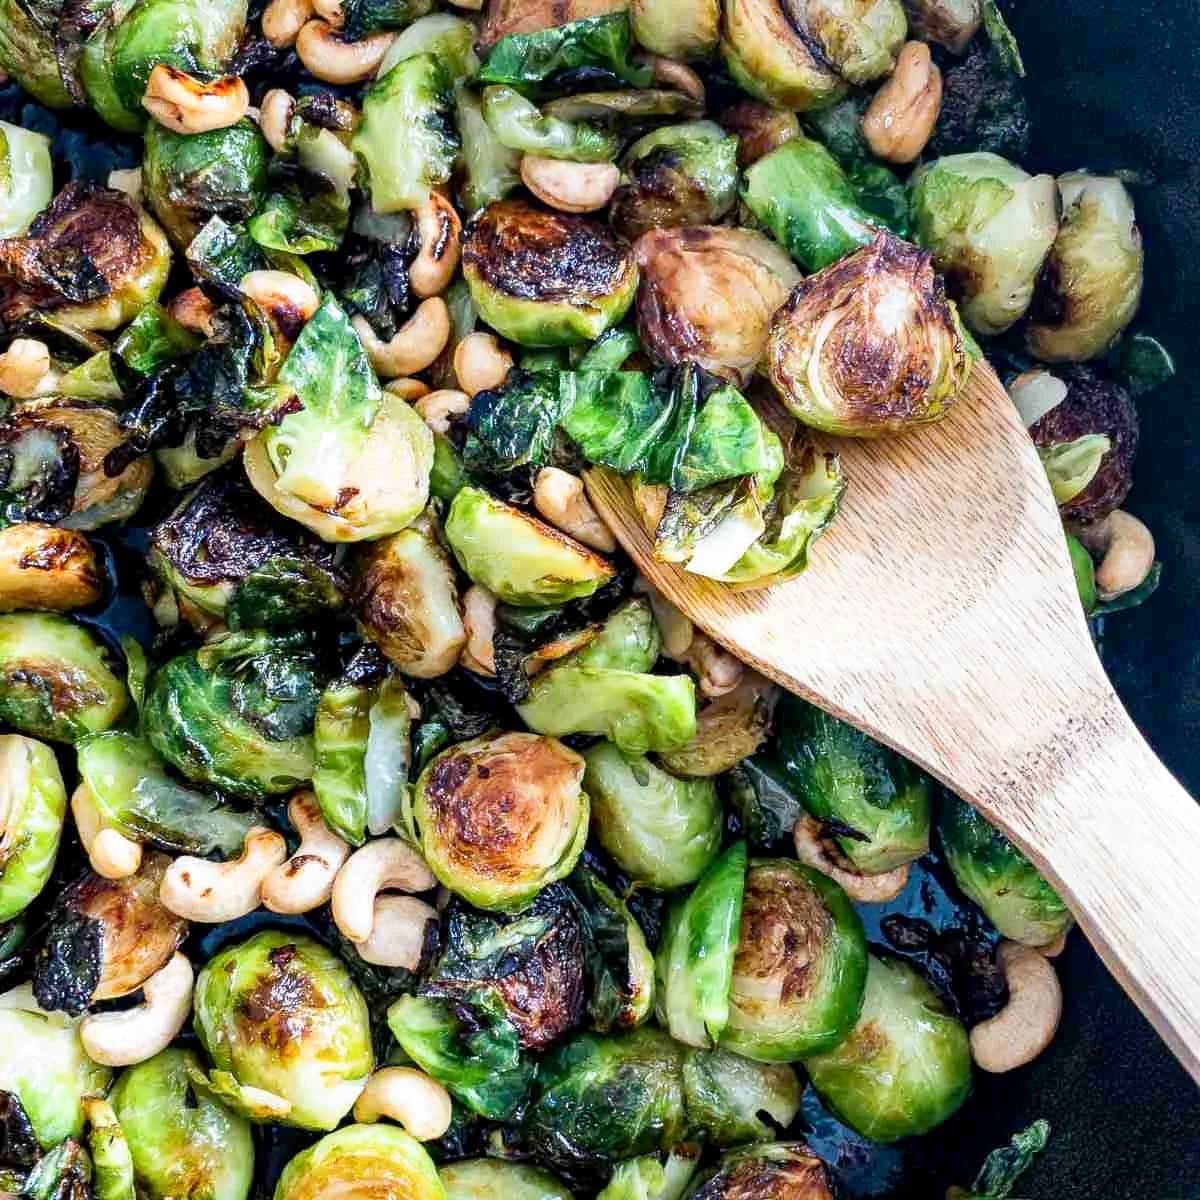 Freshly roasted Brussels sprouts holiday side dish tossed in a sriracha sauce with a wooden spoon.